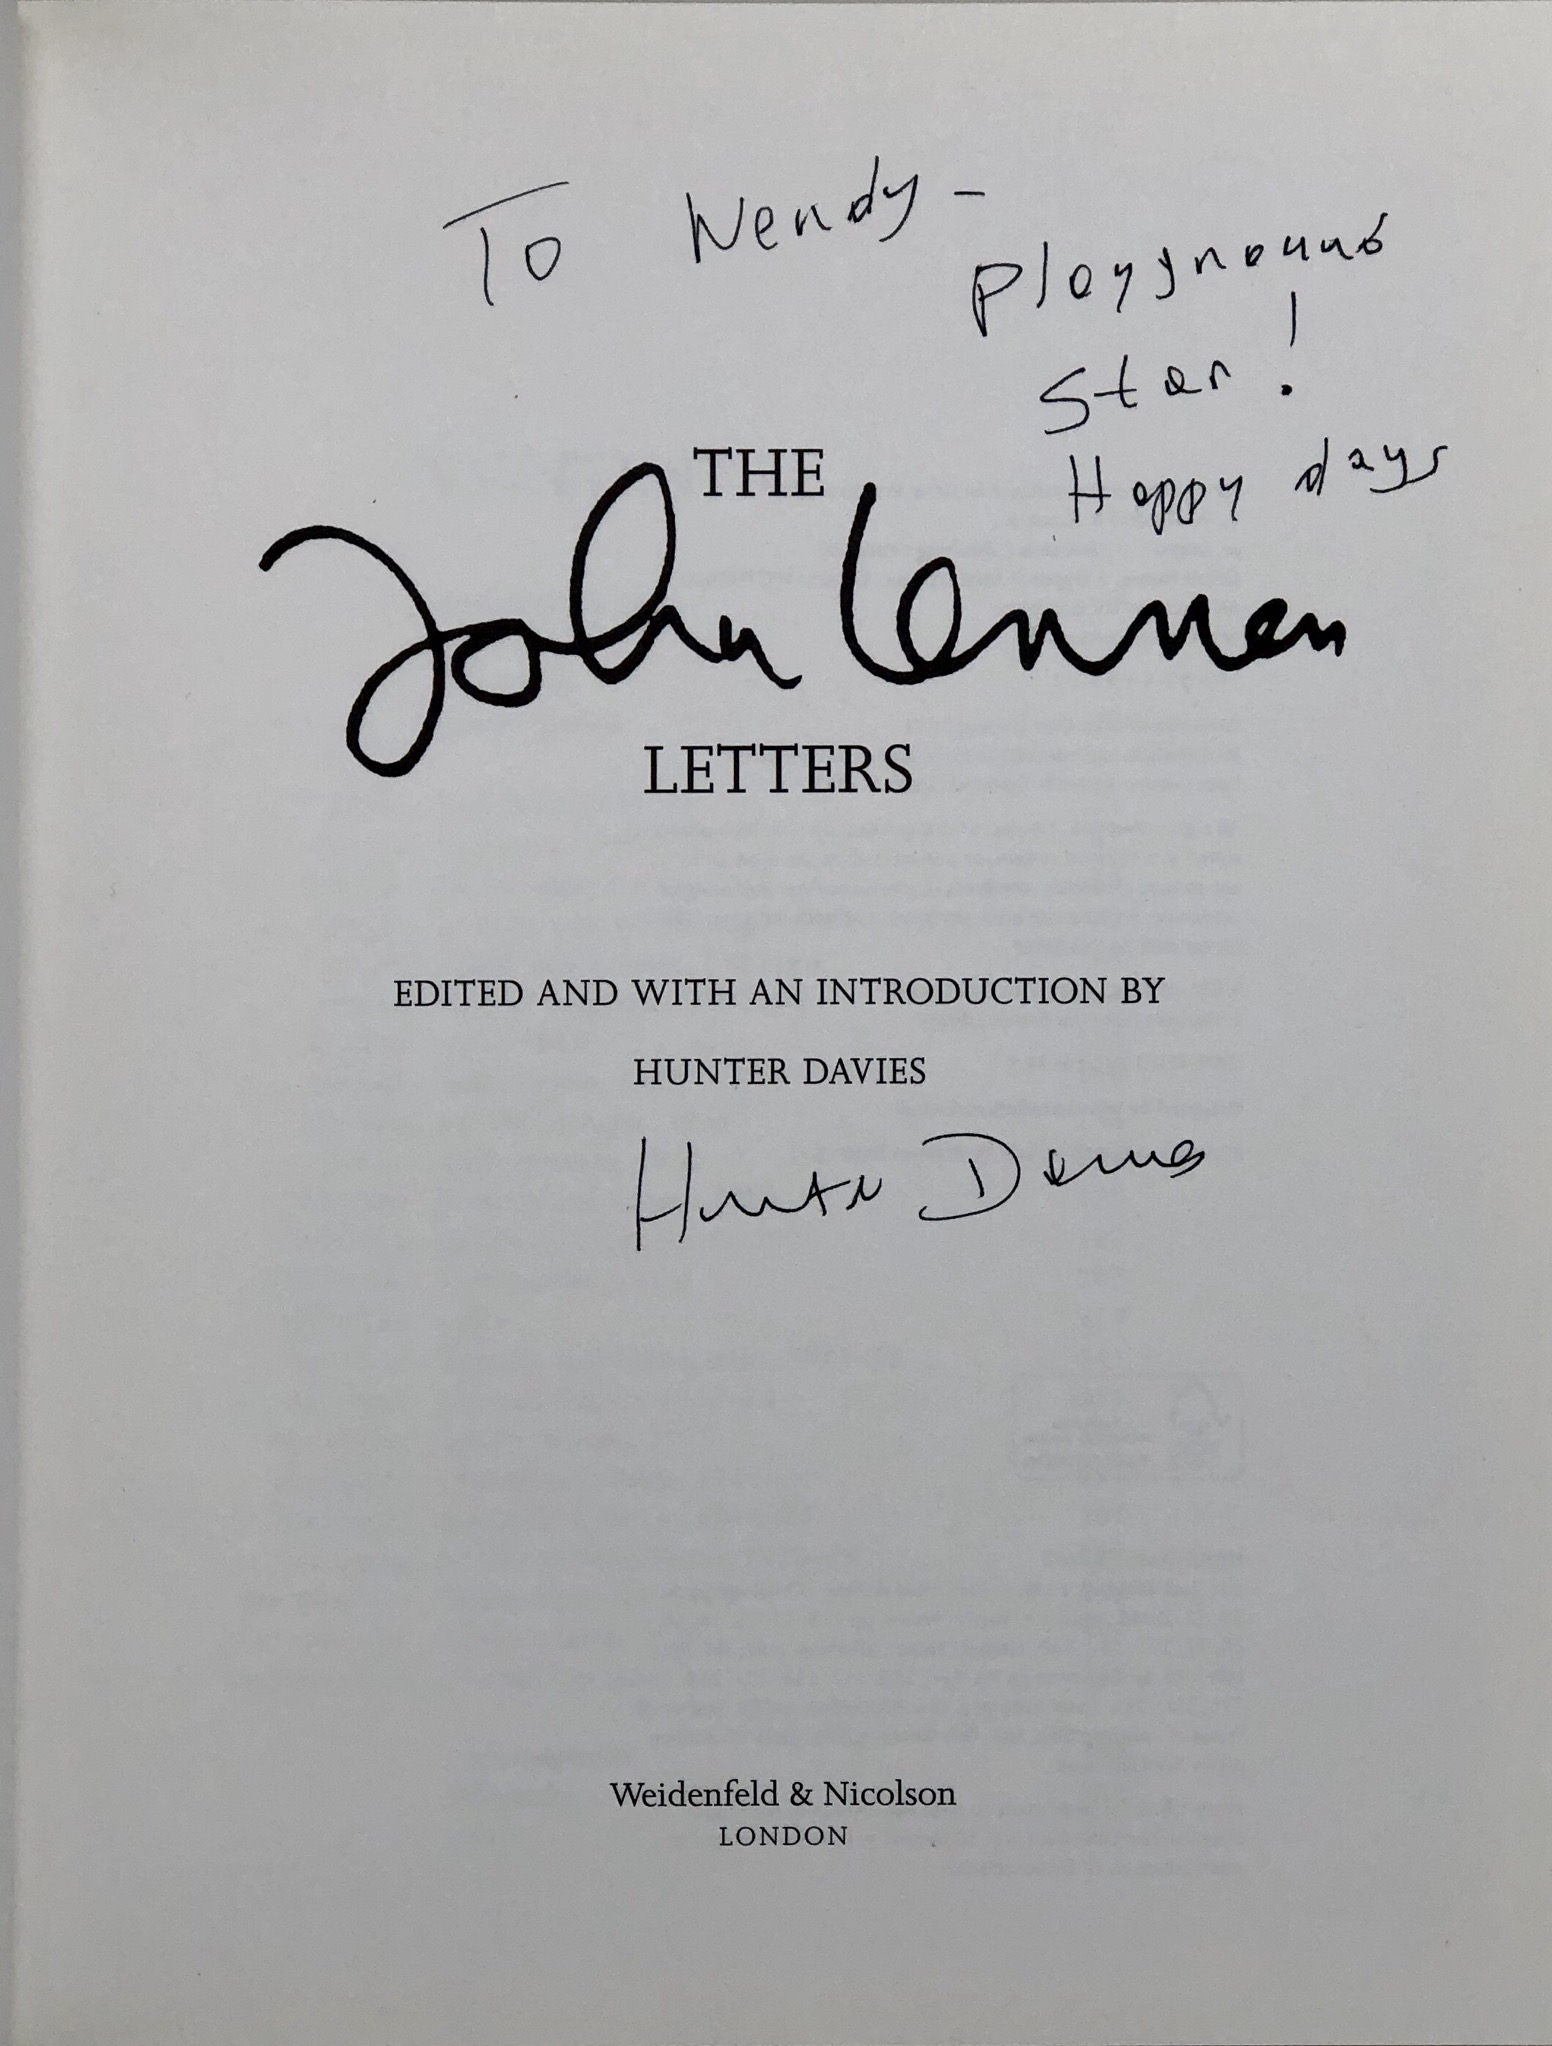 Edited and with an Introduction by Hunter Davies The John Lennon Letters